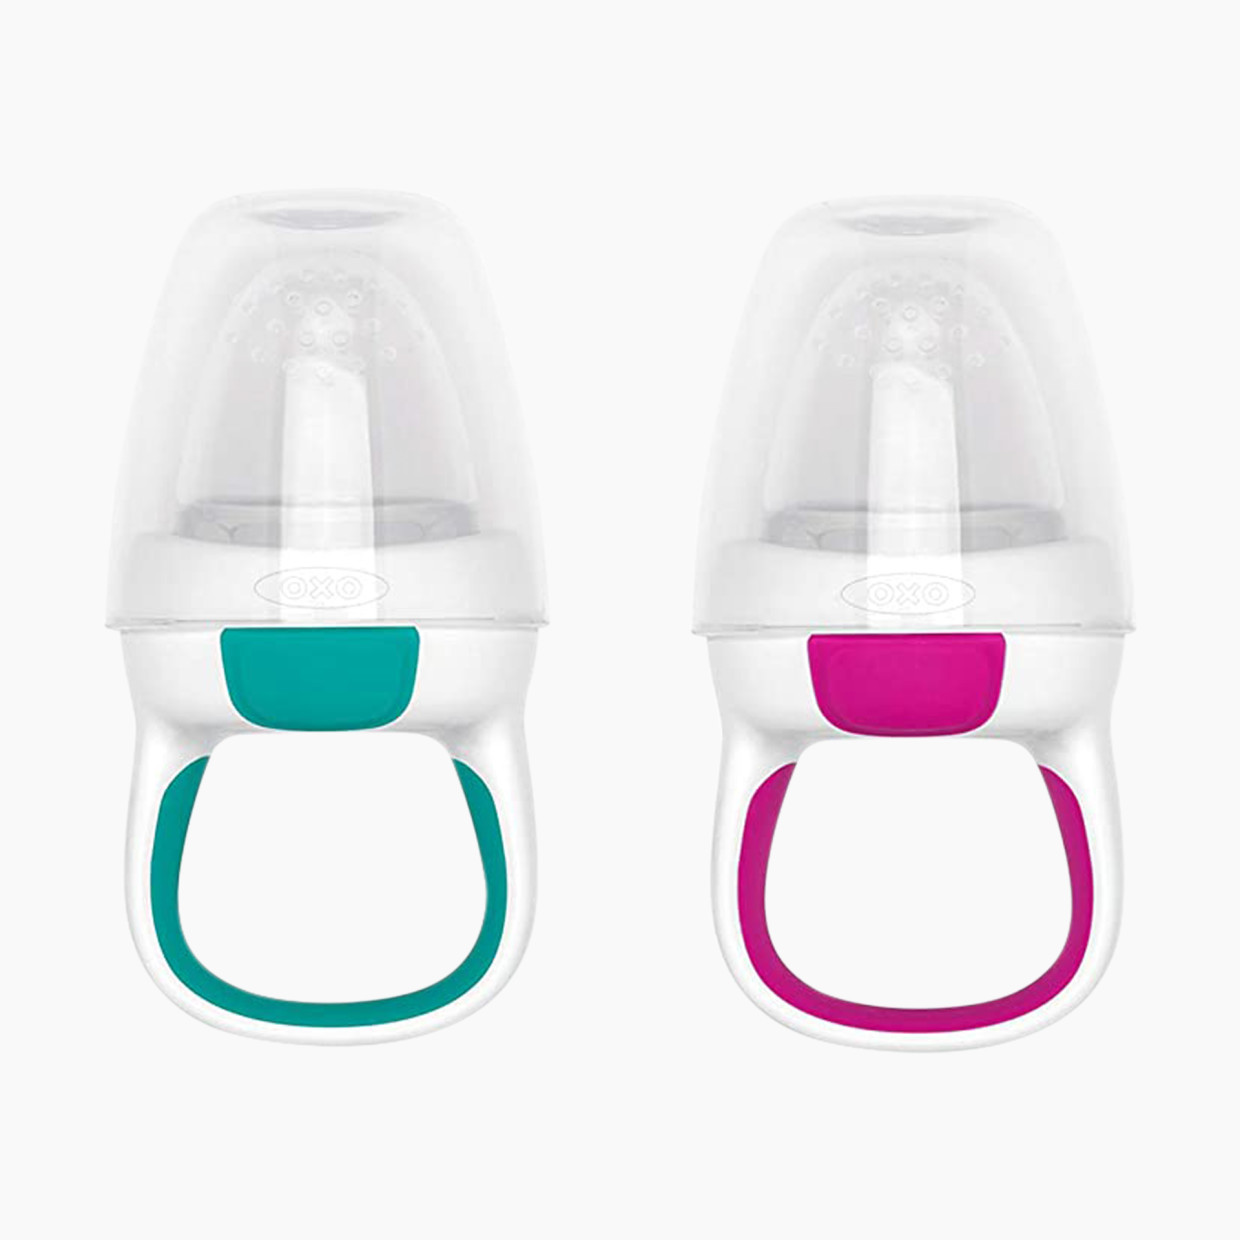 OXO Tot Silicone Self Feeder - Pink/Teal, 2.